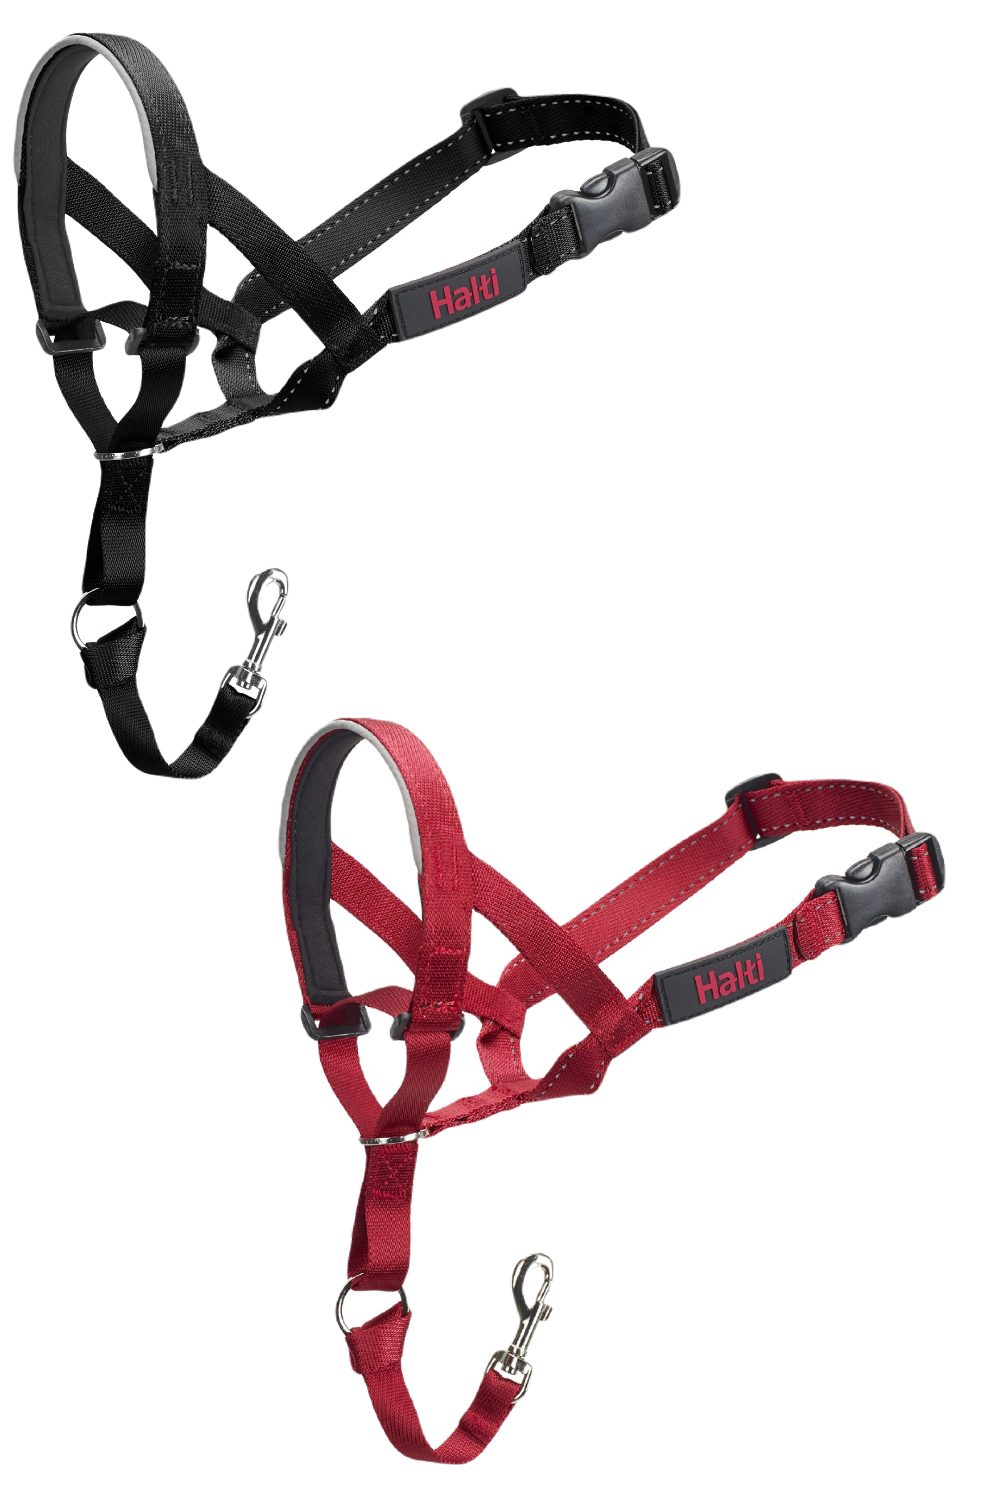 Halti Headcollar In Black and Red